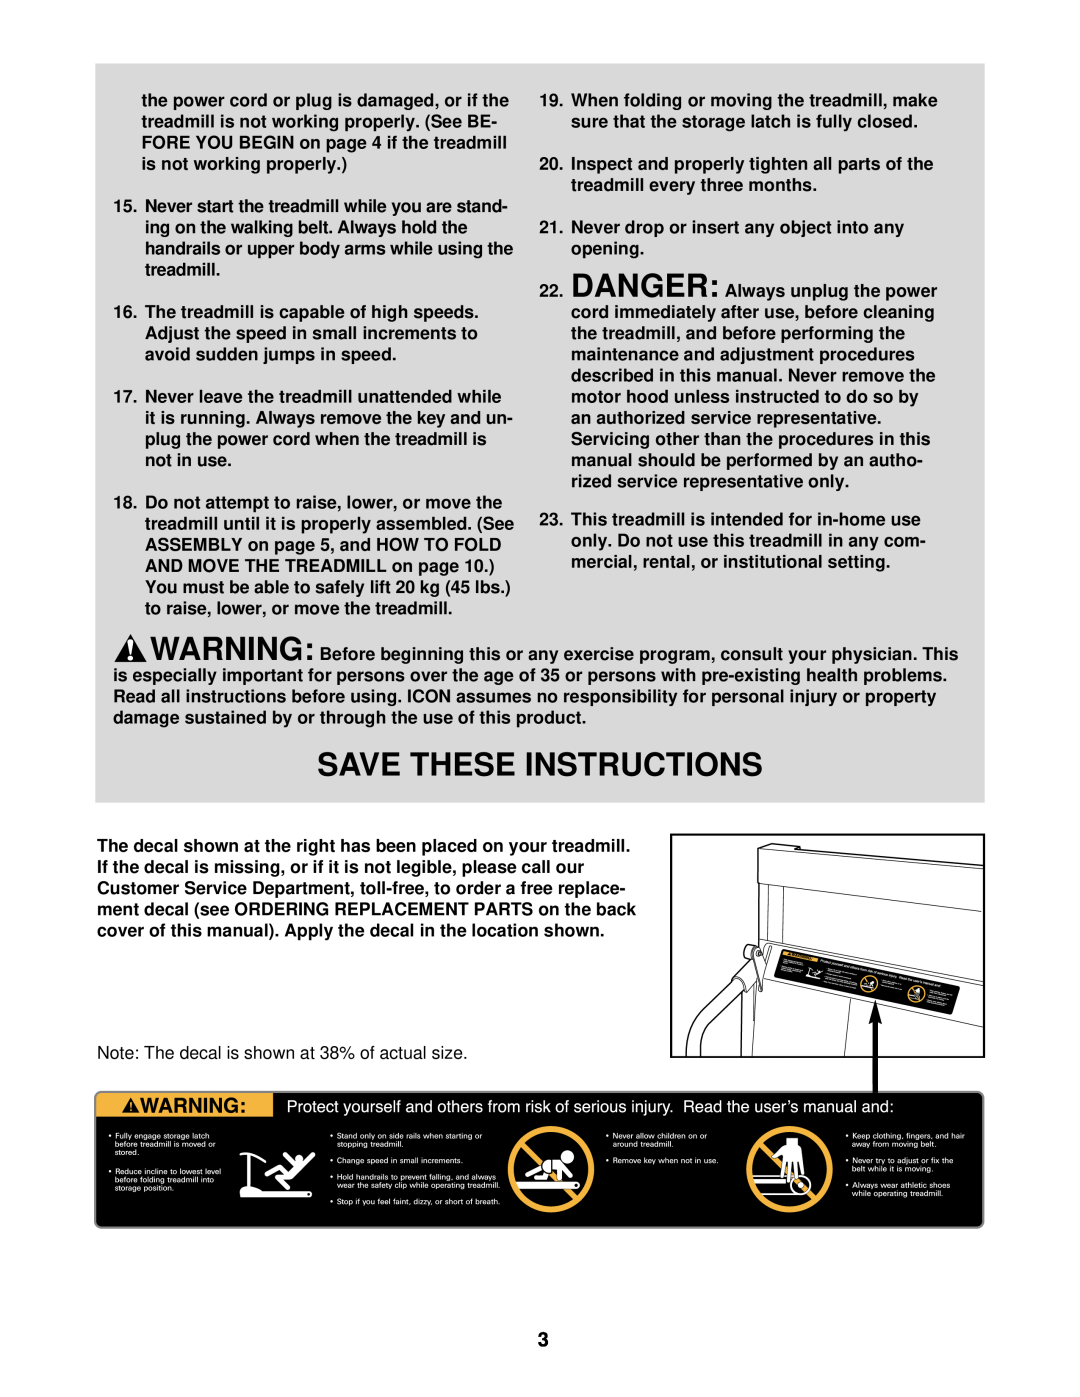 Weslo WCTL38410 user manual Save These Instructions, Never drop or insert any object into any opening 